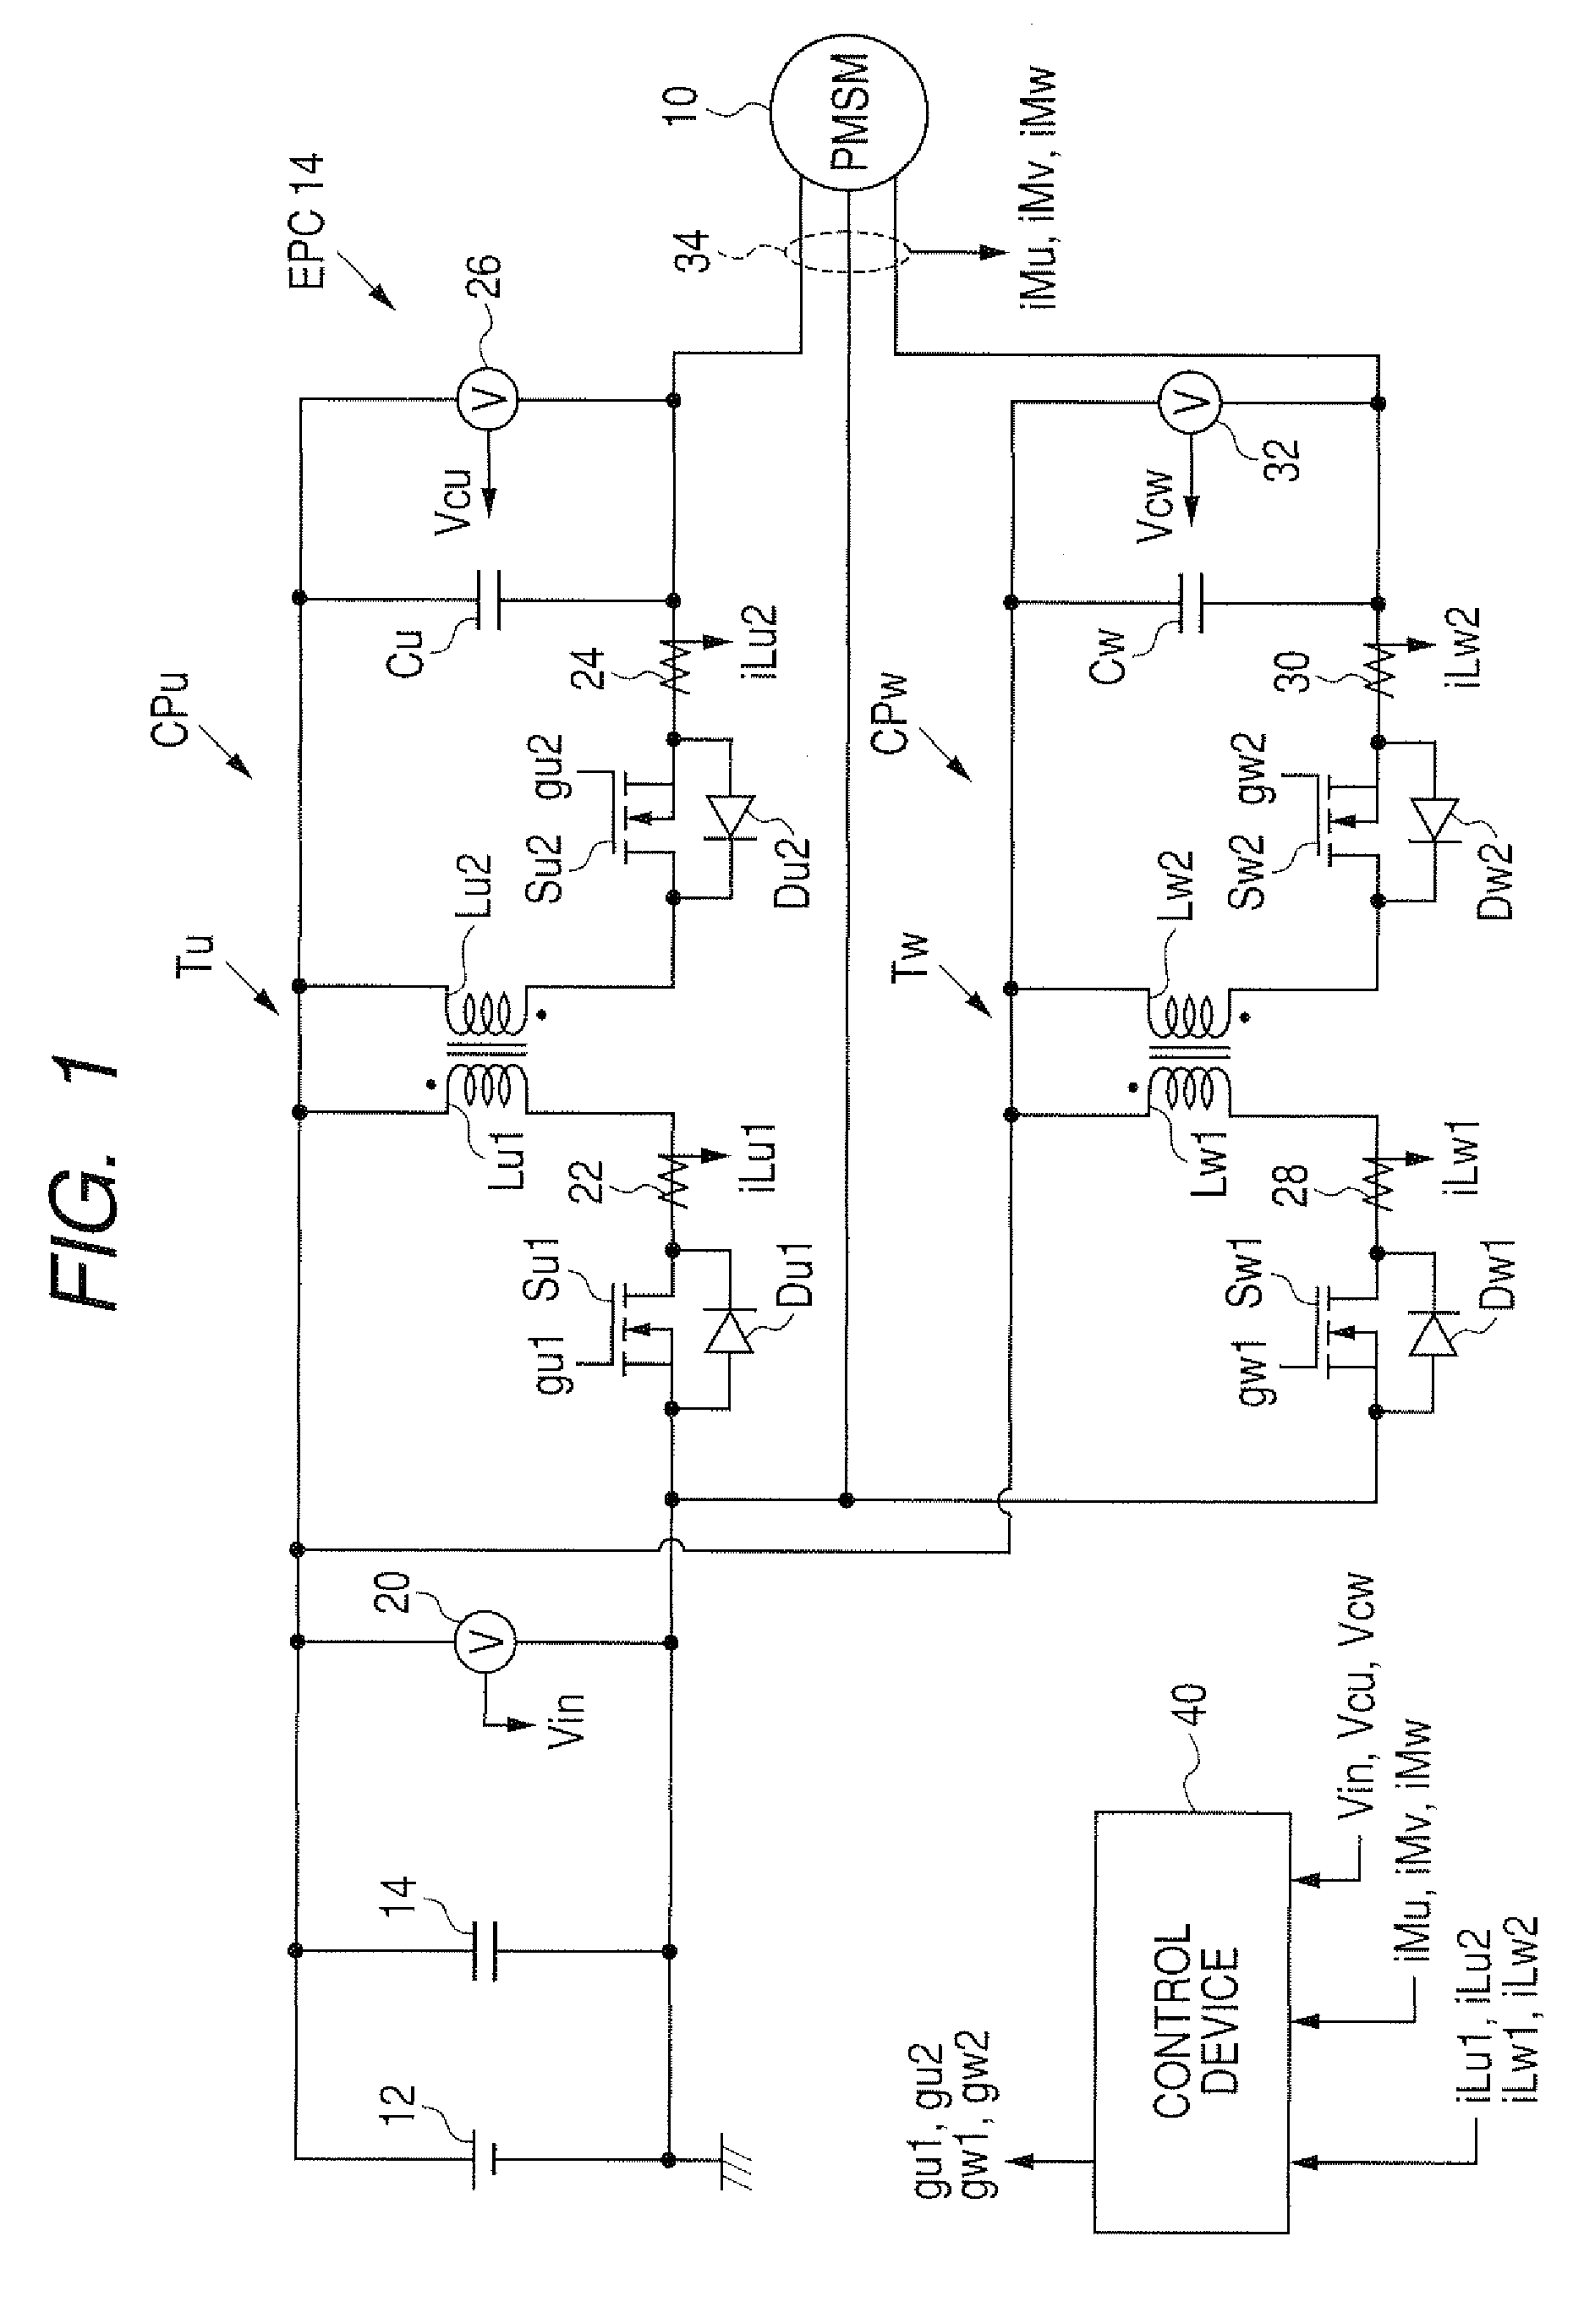 Electric power conversion circuit, and control device for multiphase electric rotary machine